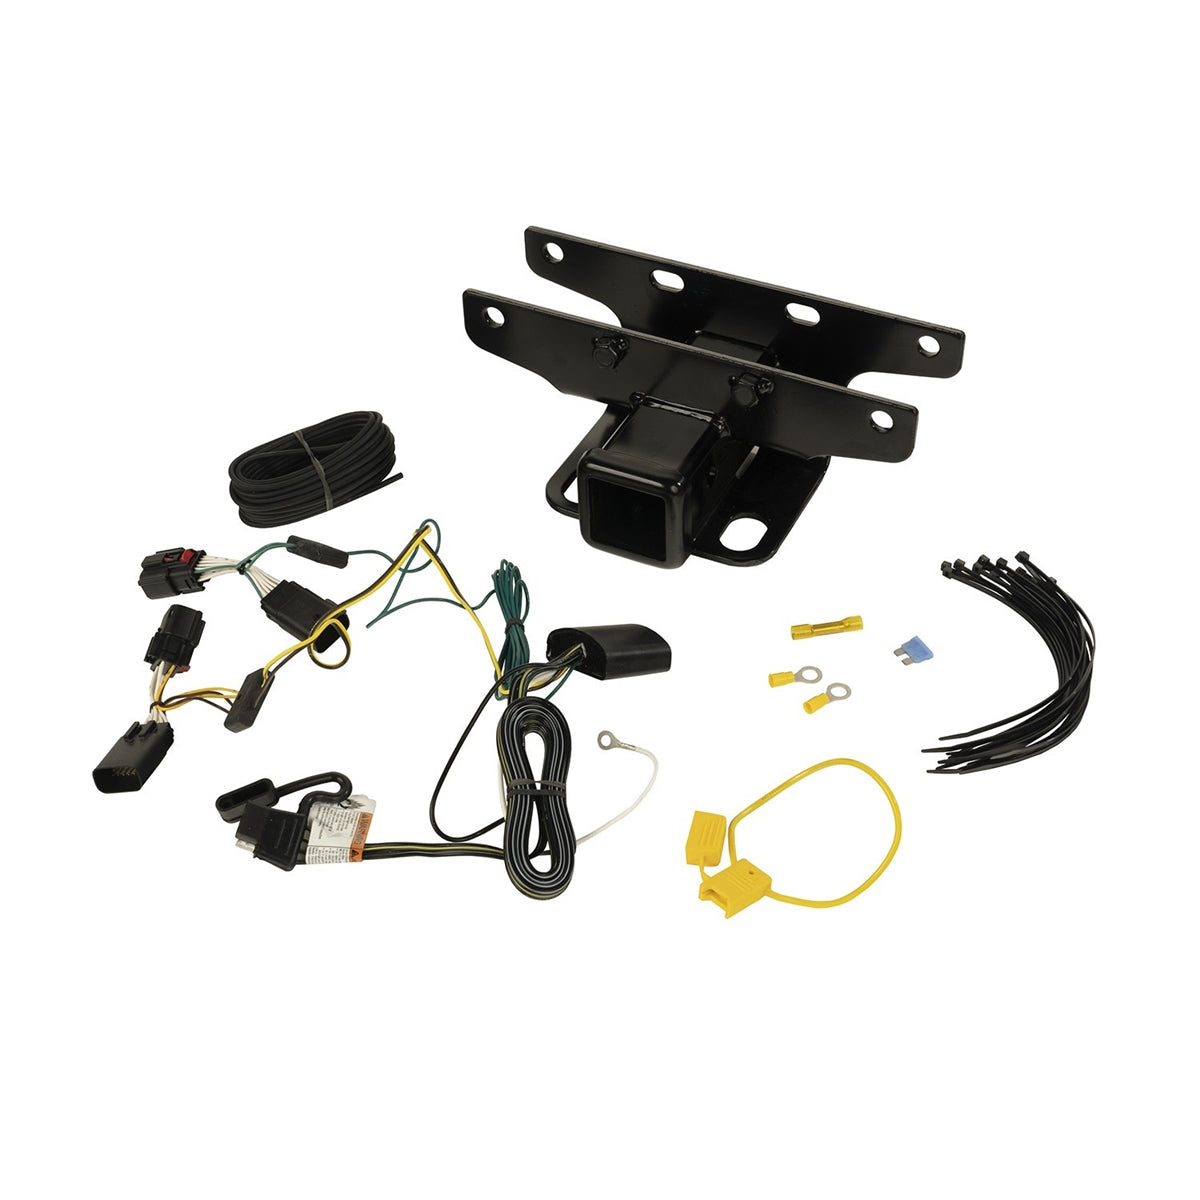 Rugged Ridge 2 Receiver Hitch With Wiring Harness For 2018+ Jeep